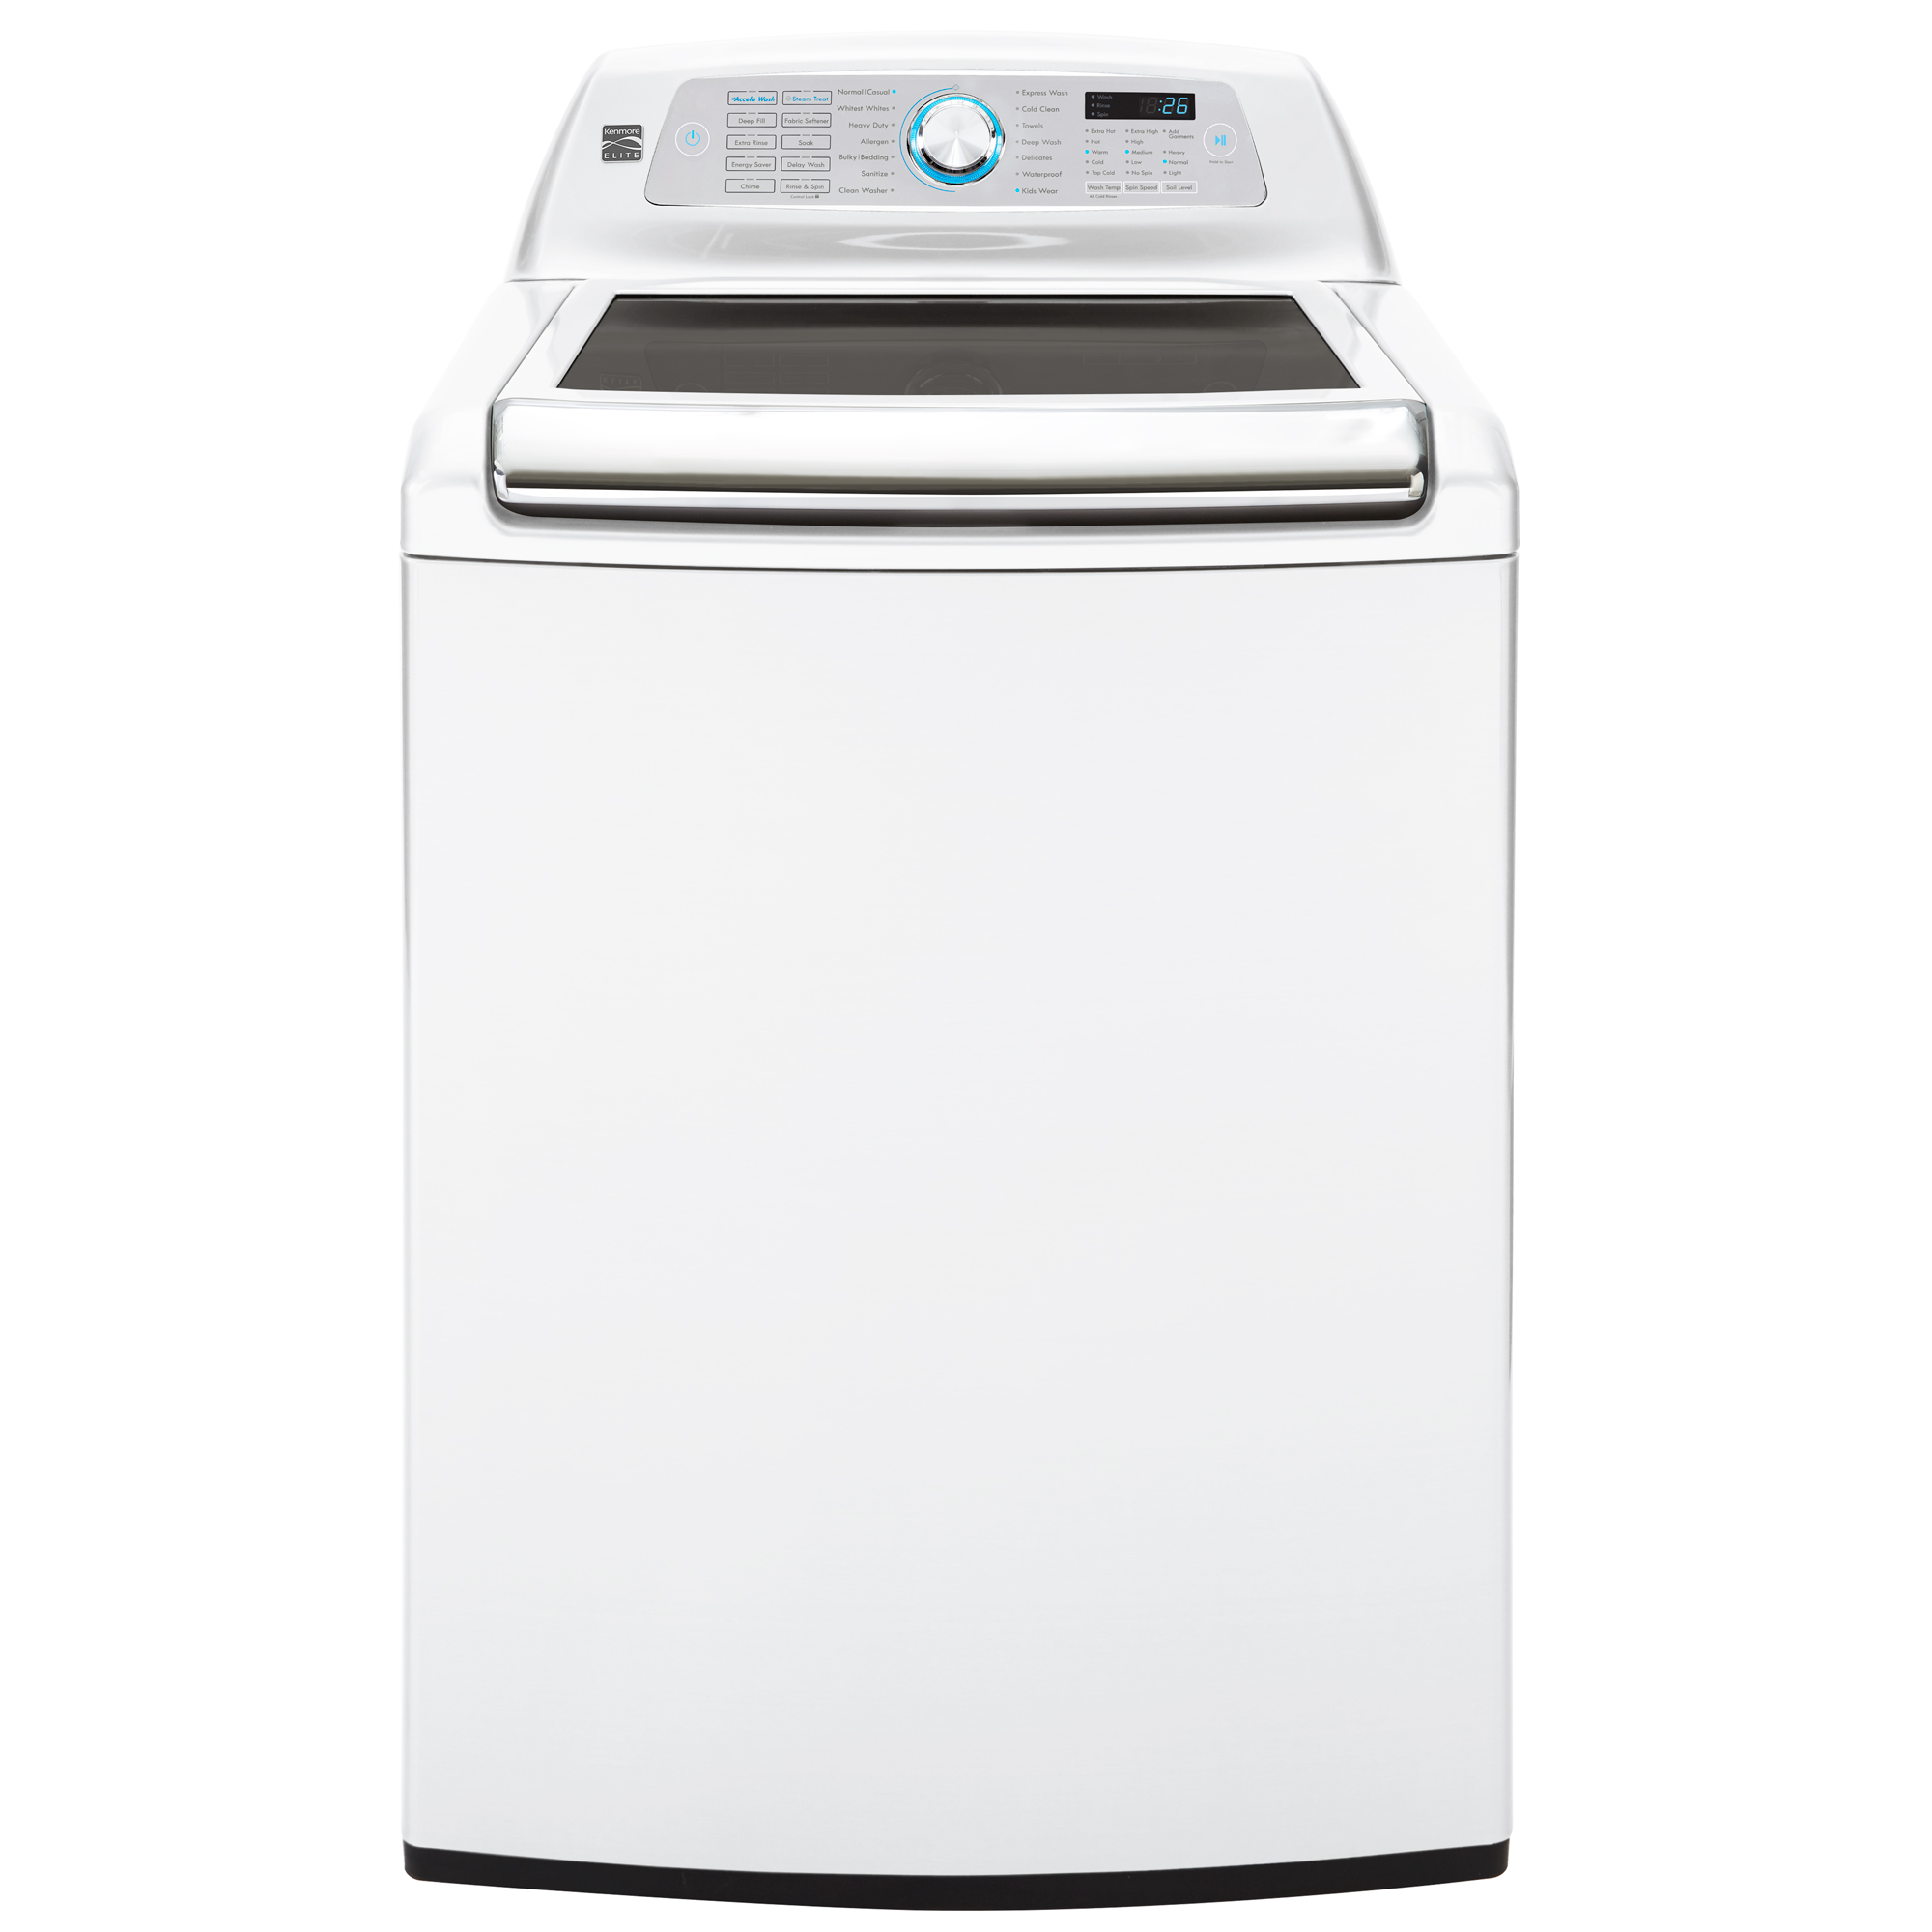 Kenmore Elite 31552 5.2 cu. ft. Top Load Washer with Steam Treat & Accela Wash